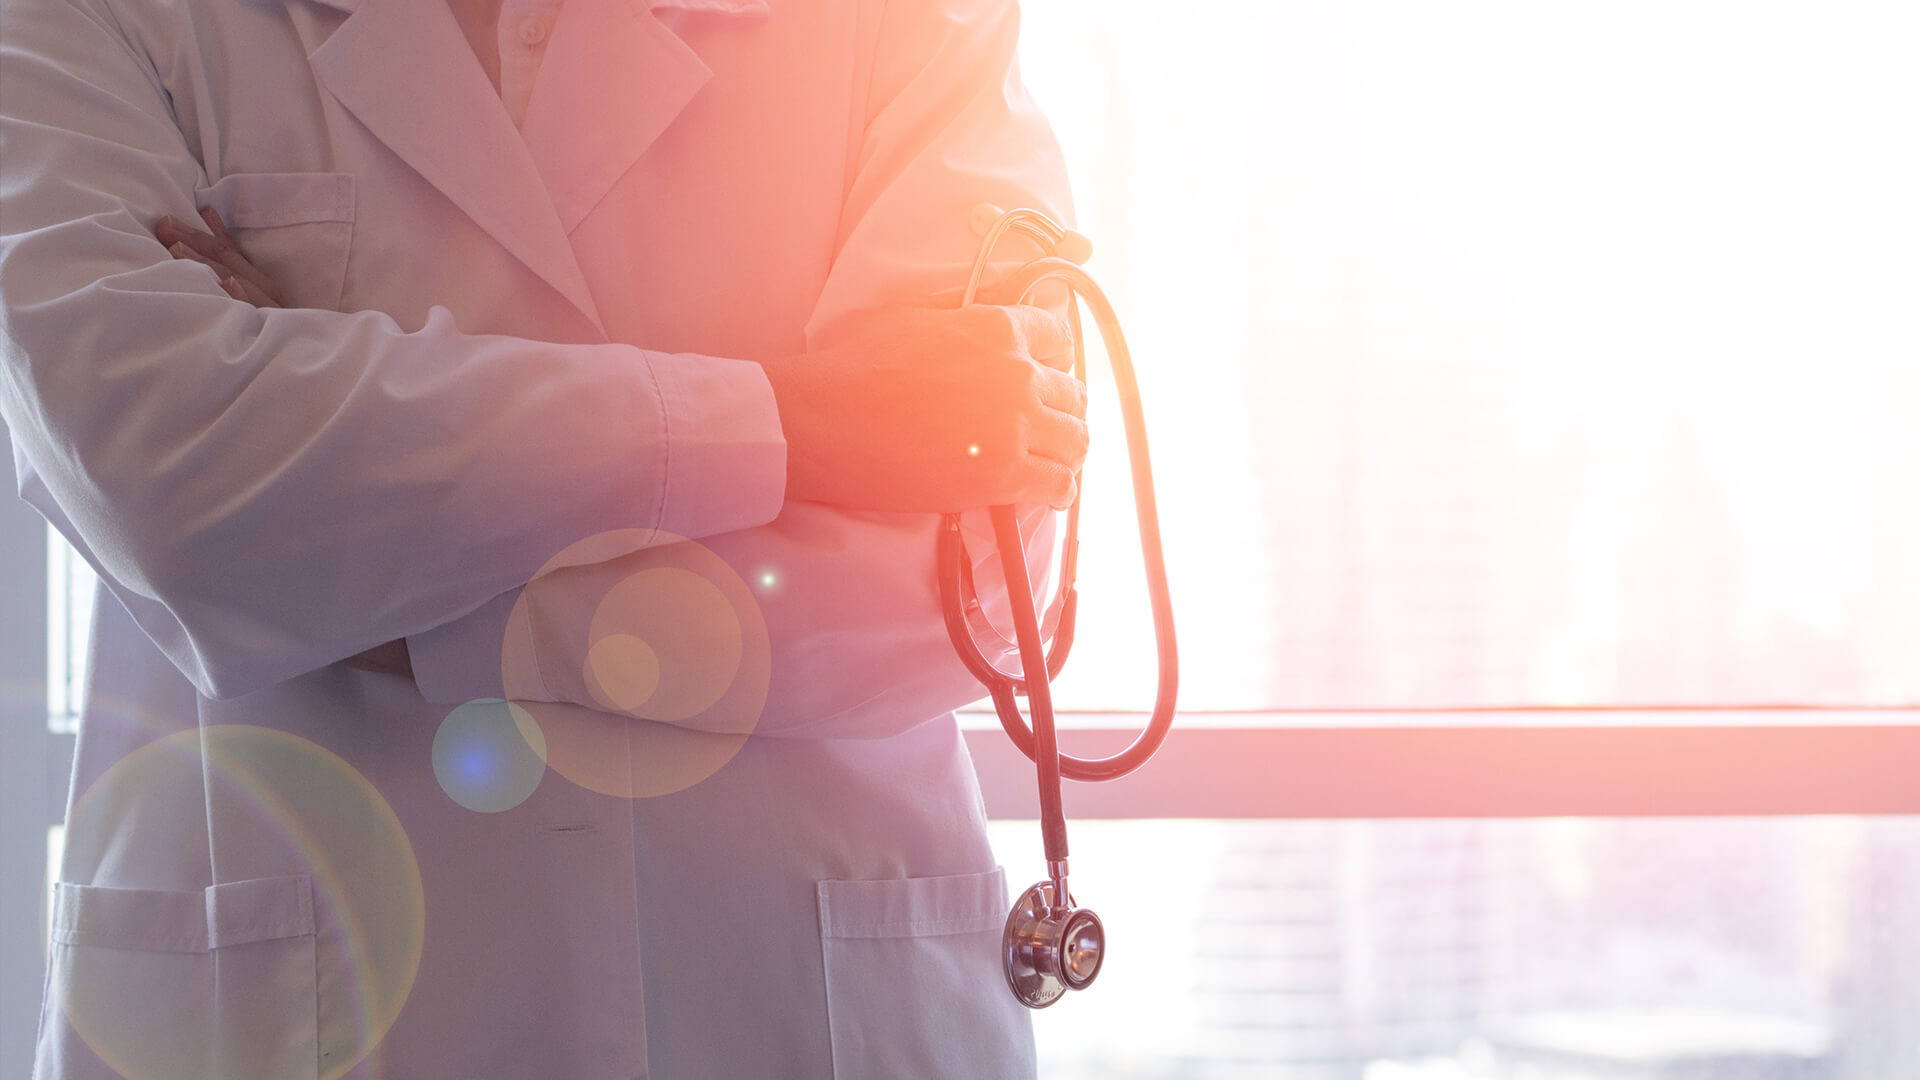 Addressing Physician Burnout Amid the COVID-19 Crisis